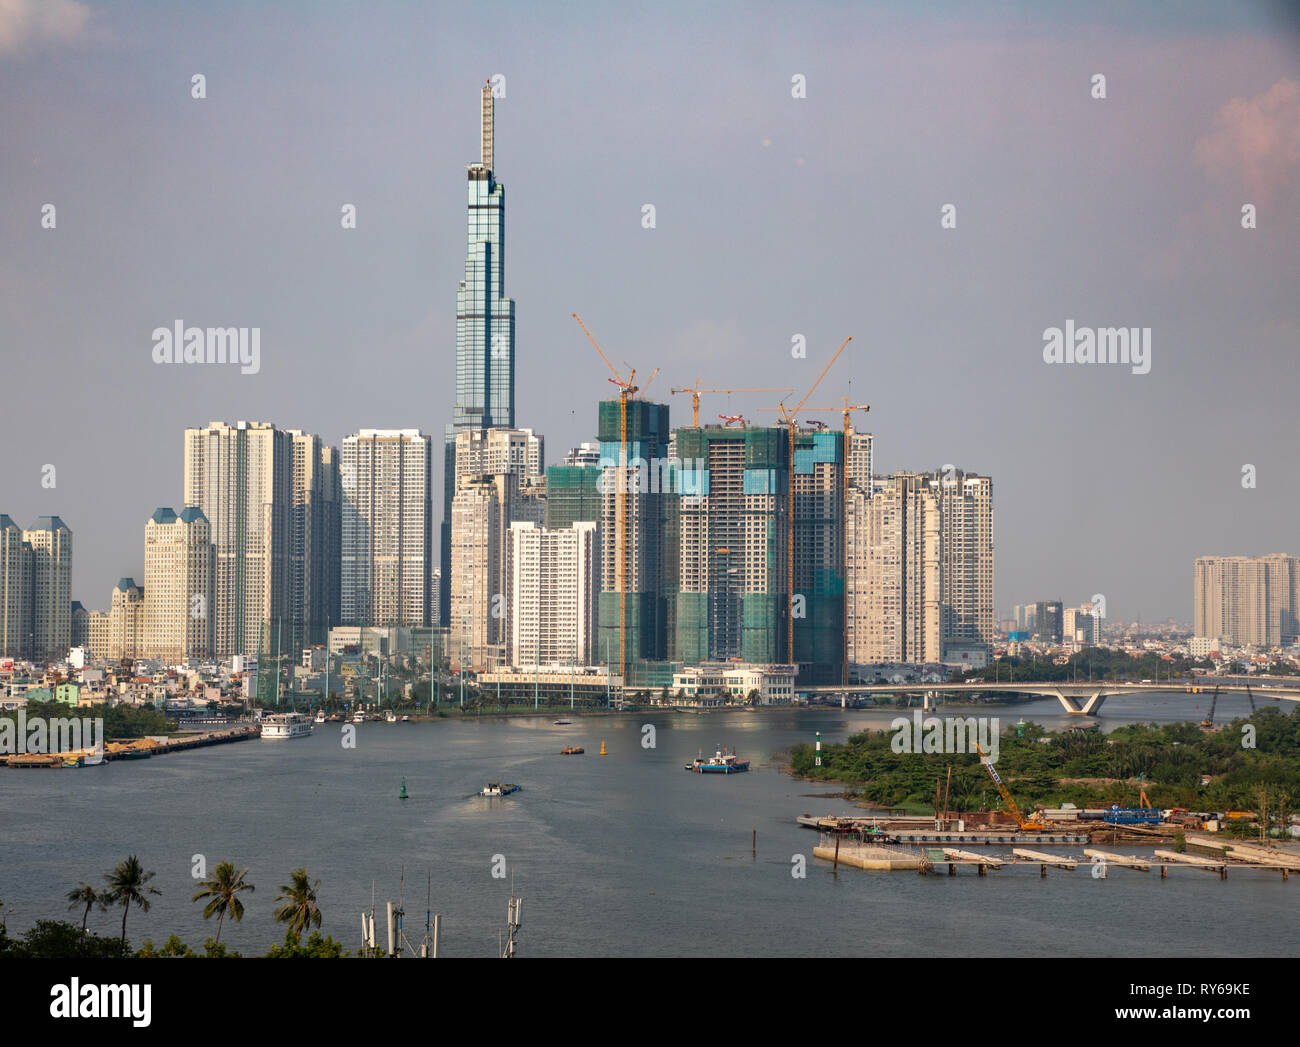 Saigon River, Ho Chi Minh City, Vietnam, Sunday 12th March 2019.  Hot sunny day with highs of 34 degrees along the riverfront. Ho Chi Minh is the largest city in Vietnam with 9 million residents. Credit: WansfordPhoto/Alamy Live News Stock Photo